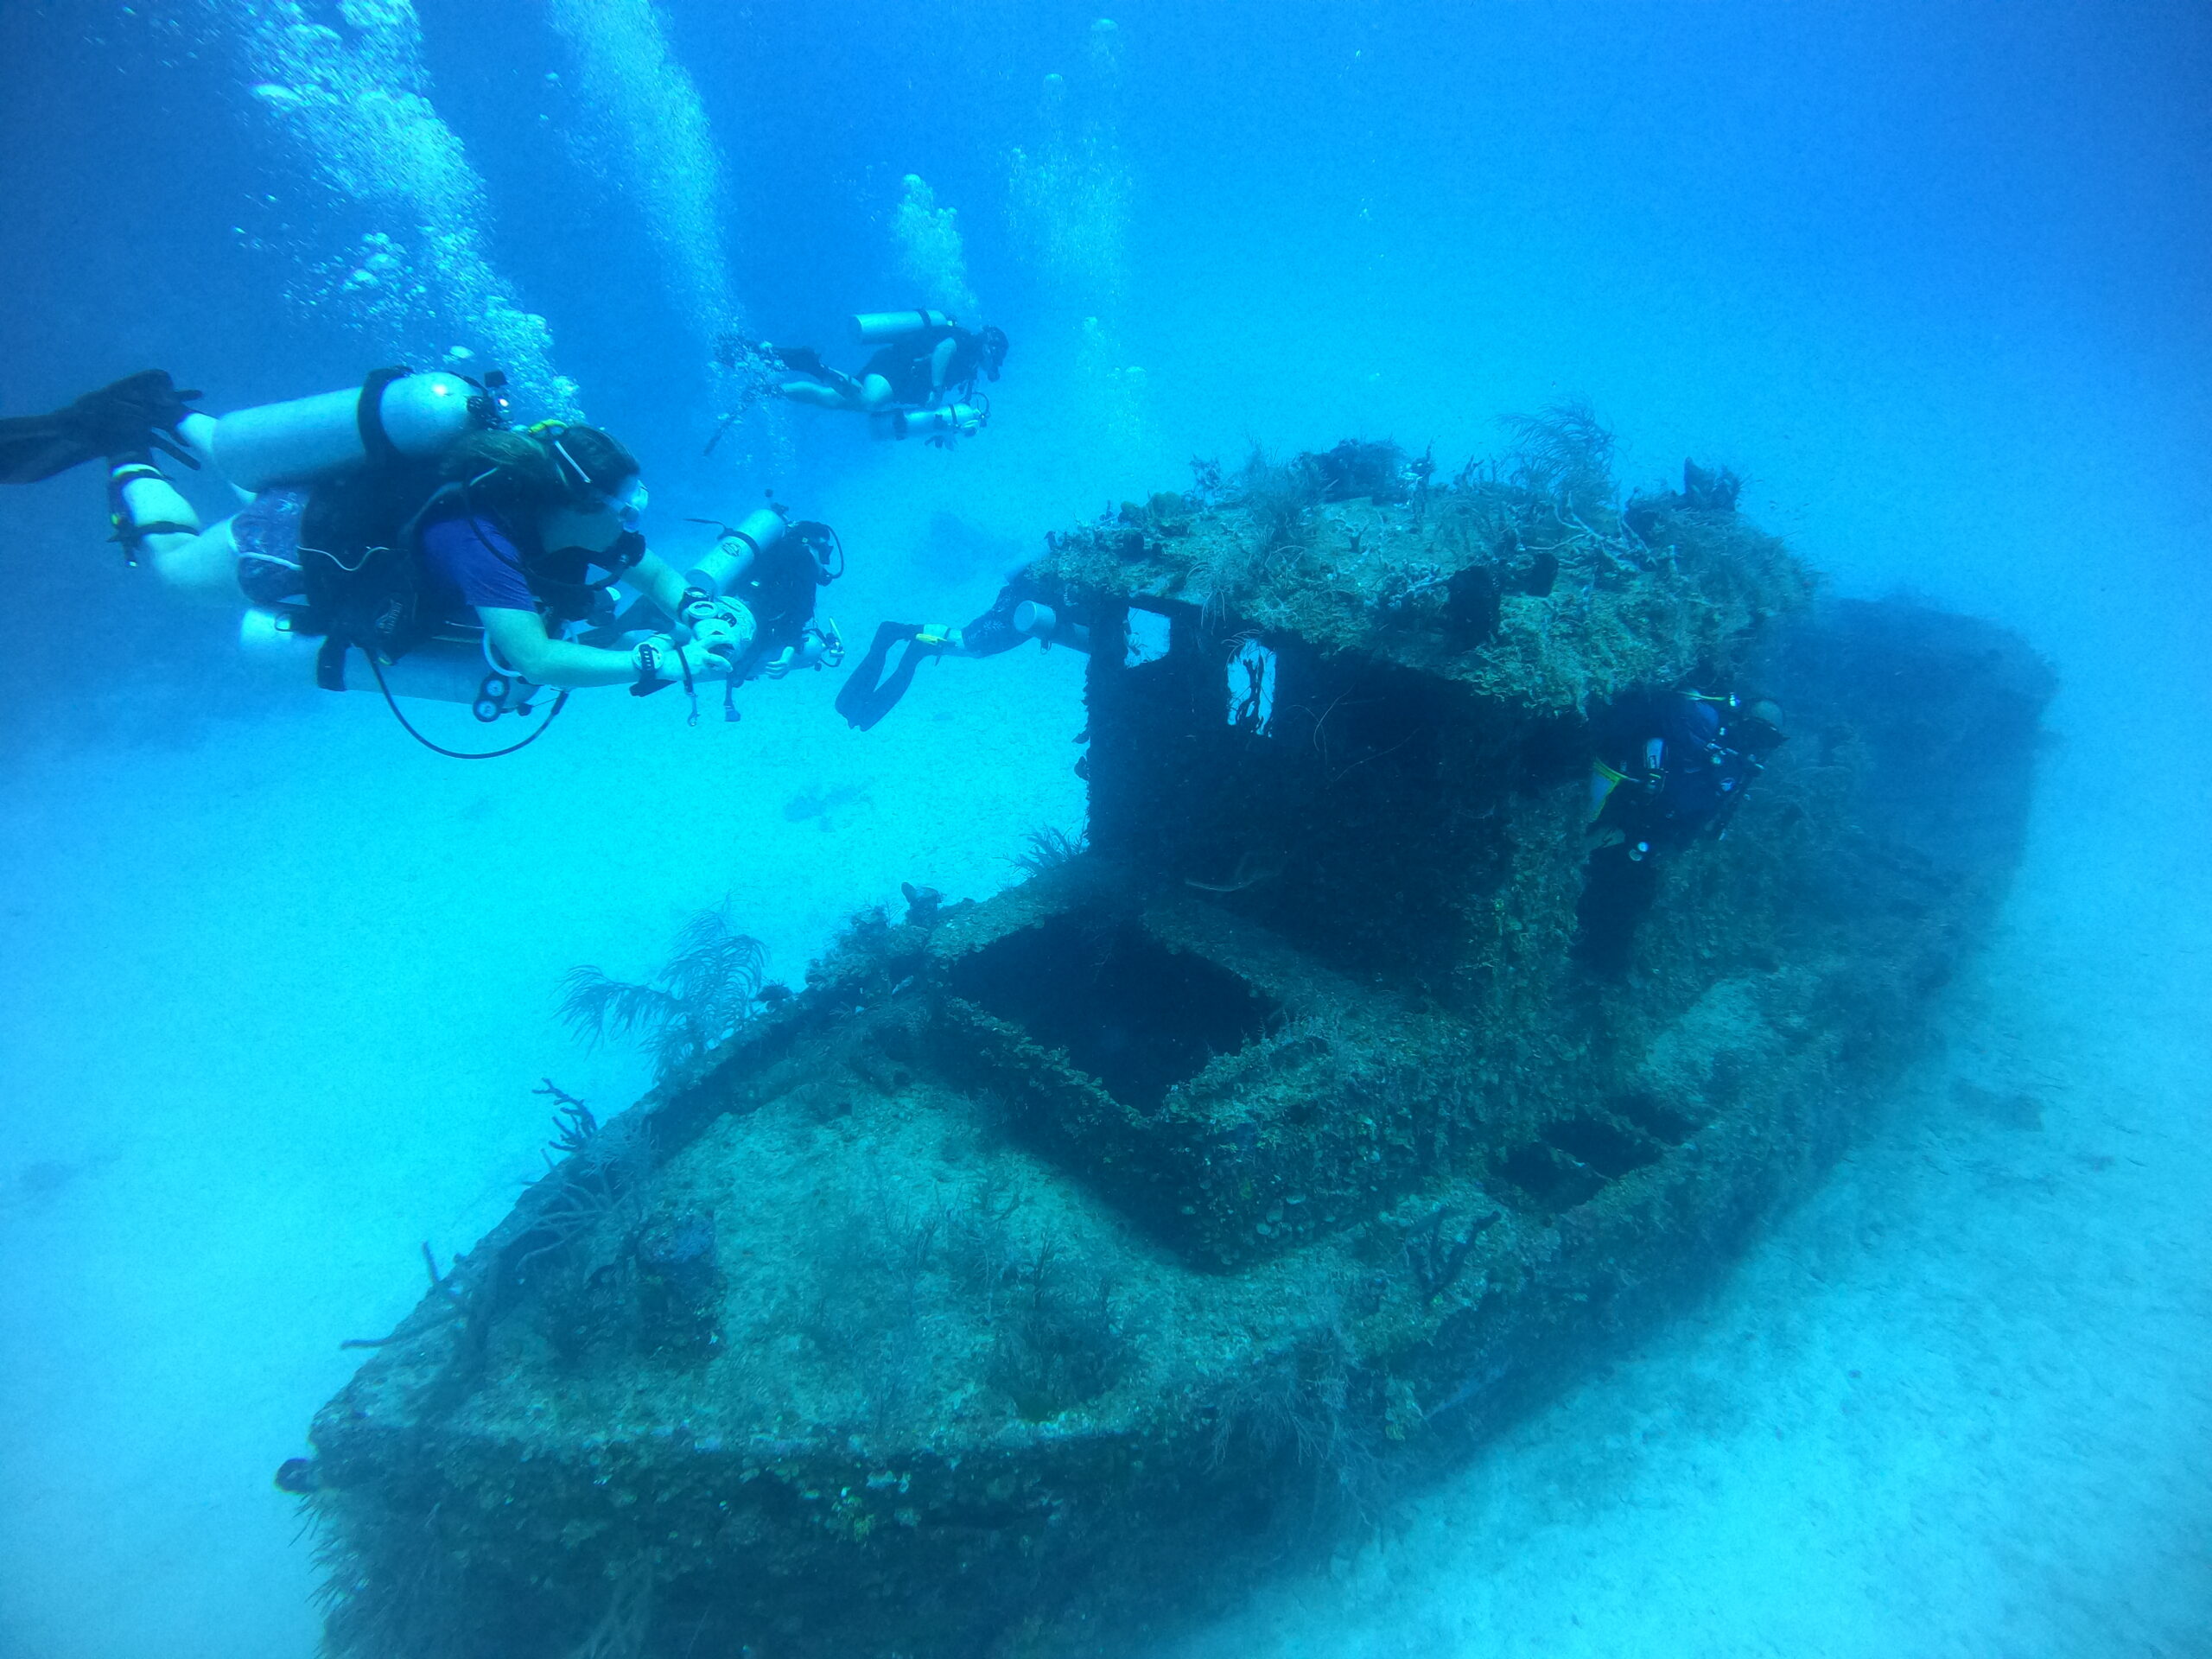 A sunken ship that has been turned to a coral reef